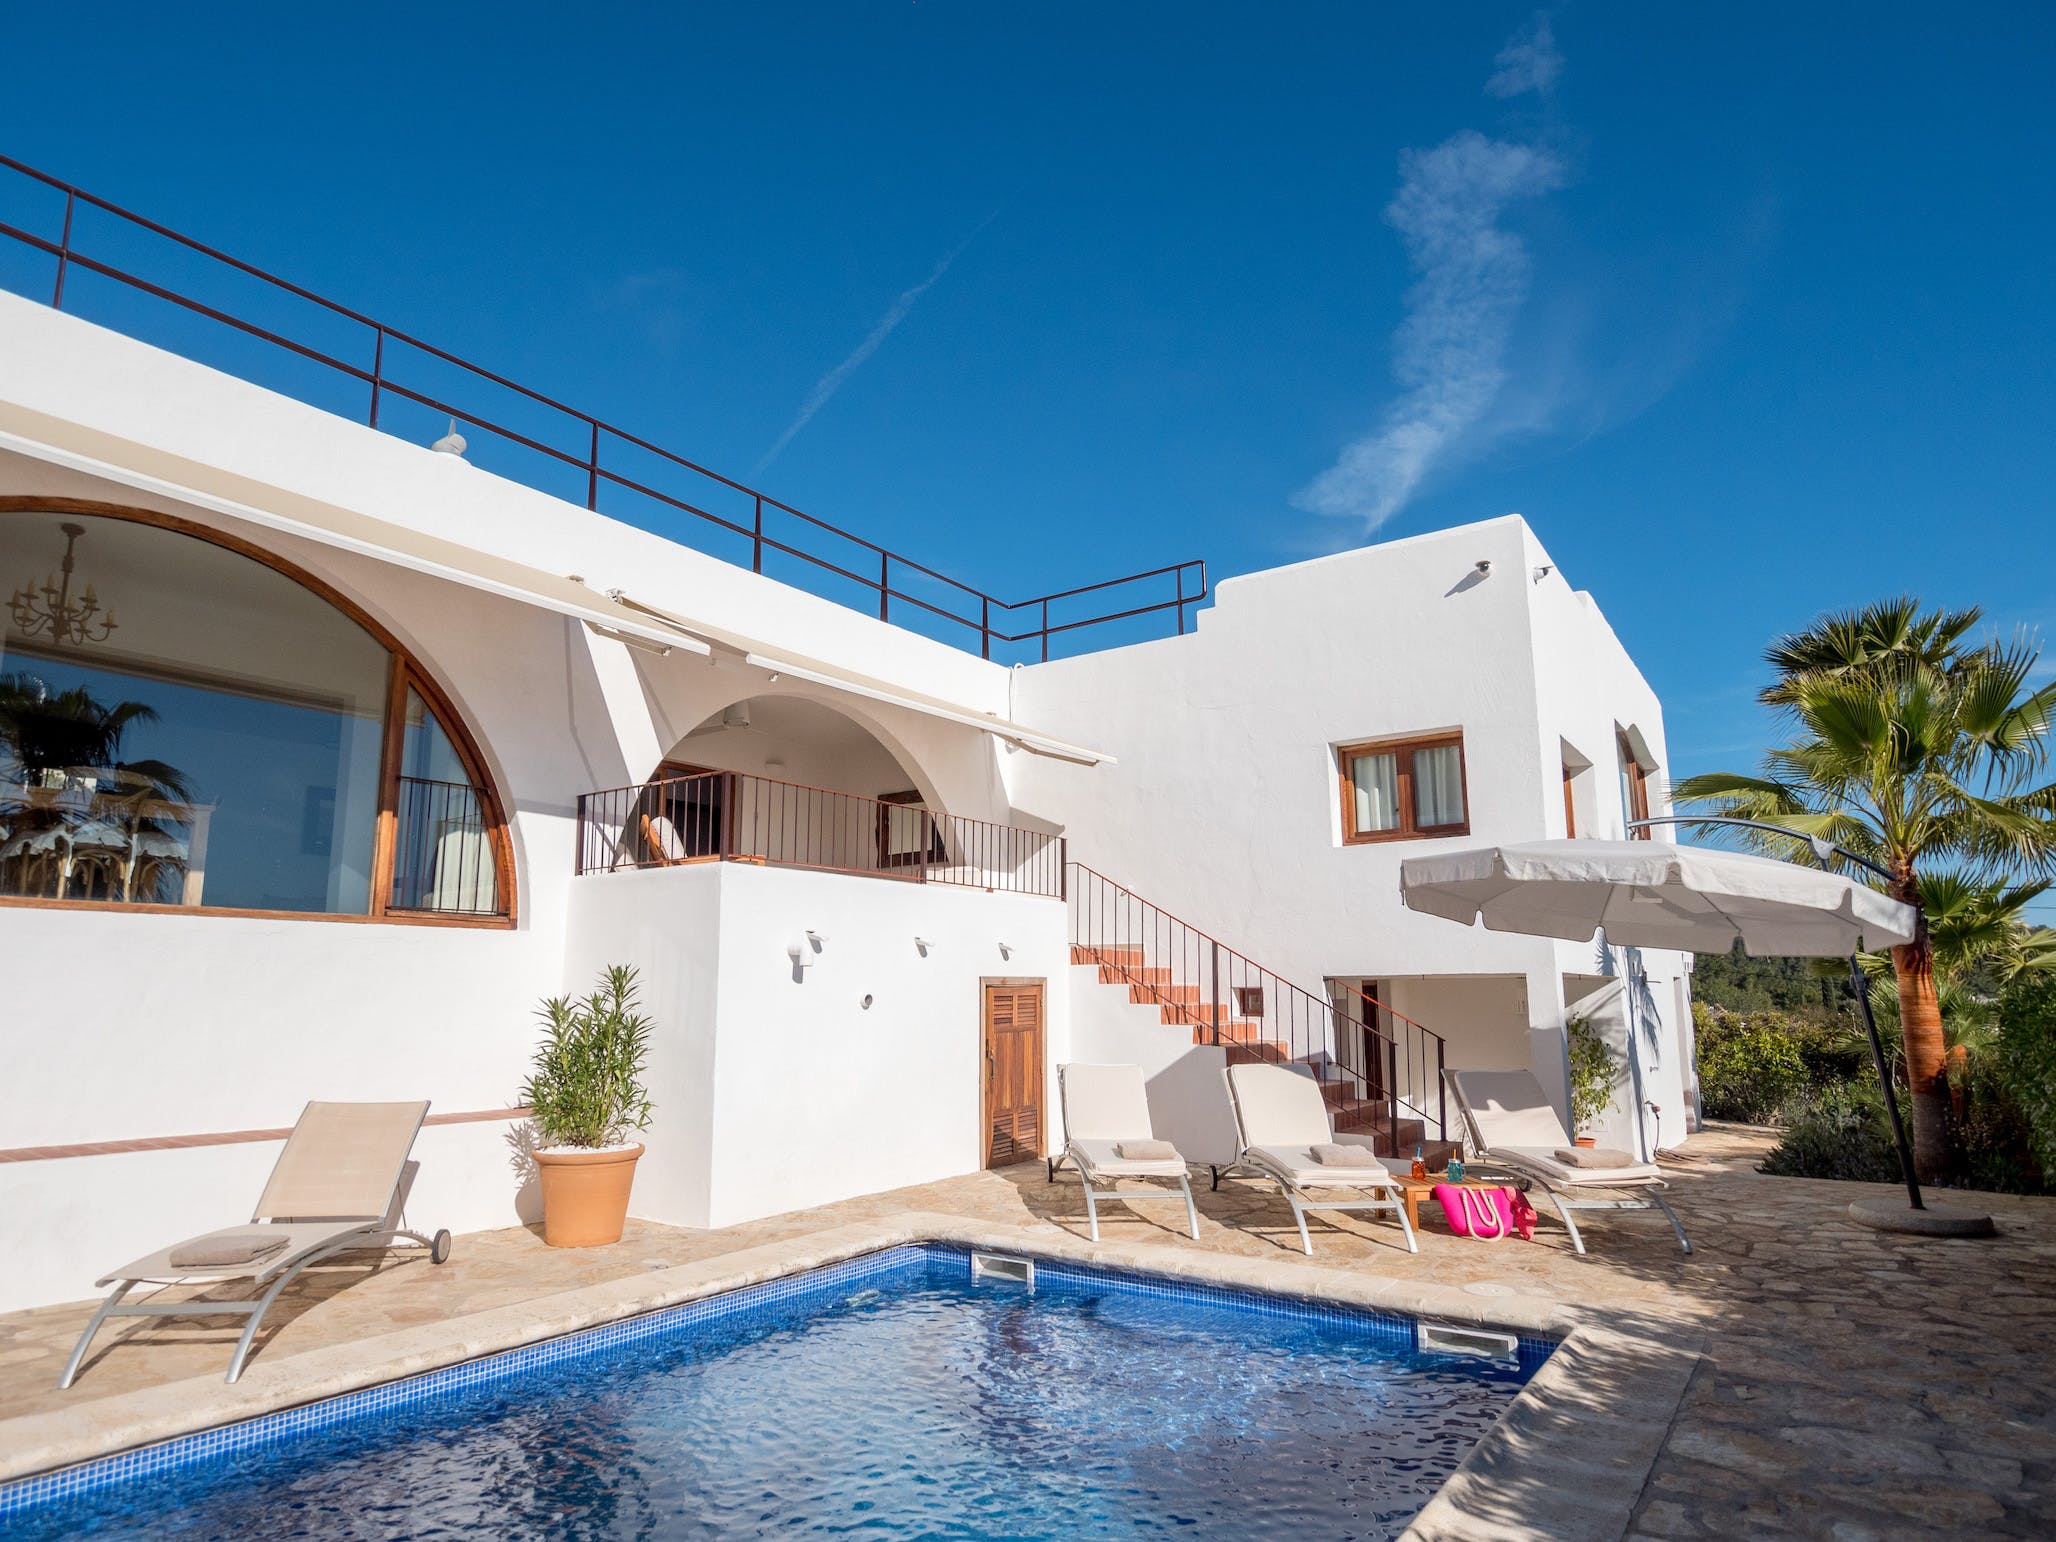 You are currently viewing Can Cortez – ‘Very nice recently refurbished villa.’